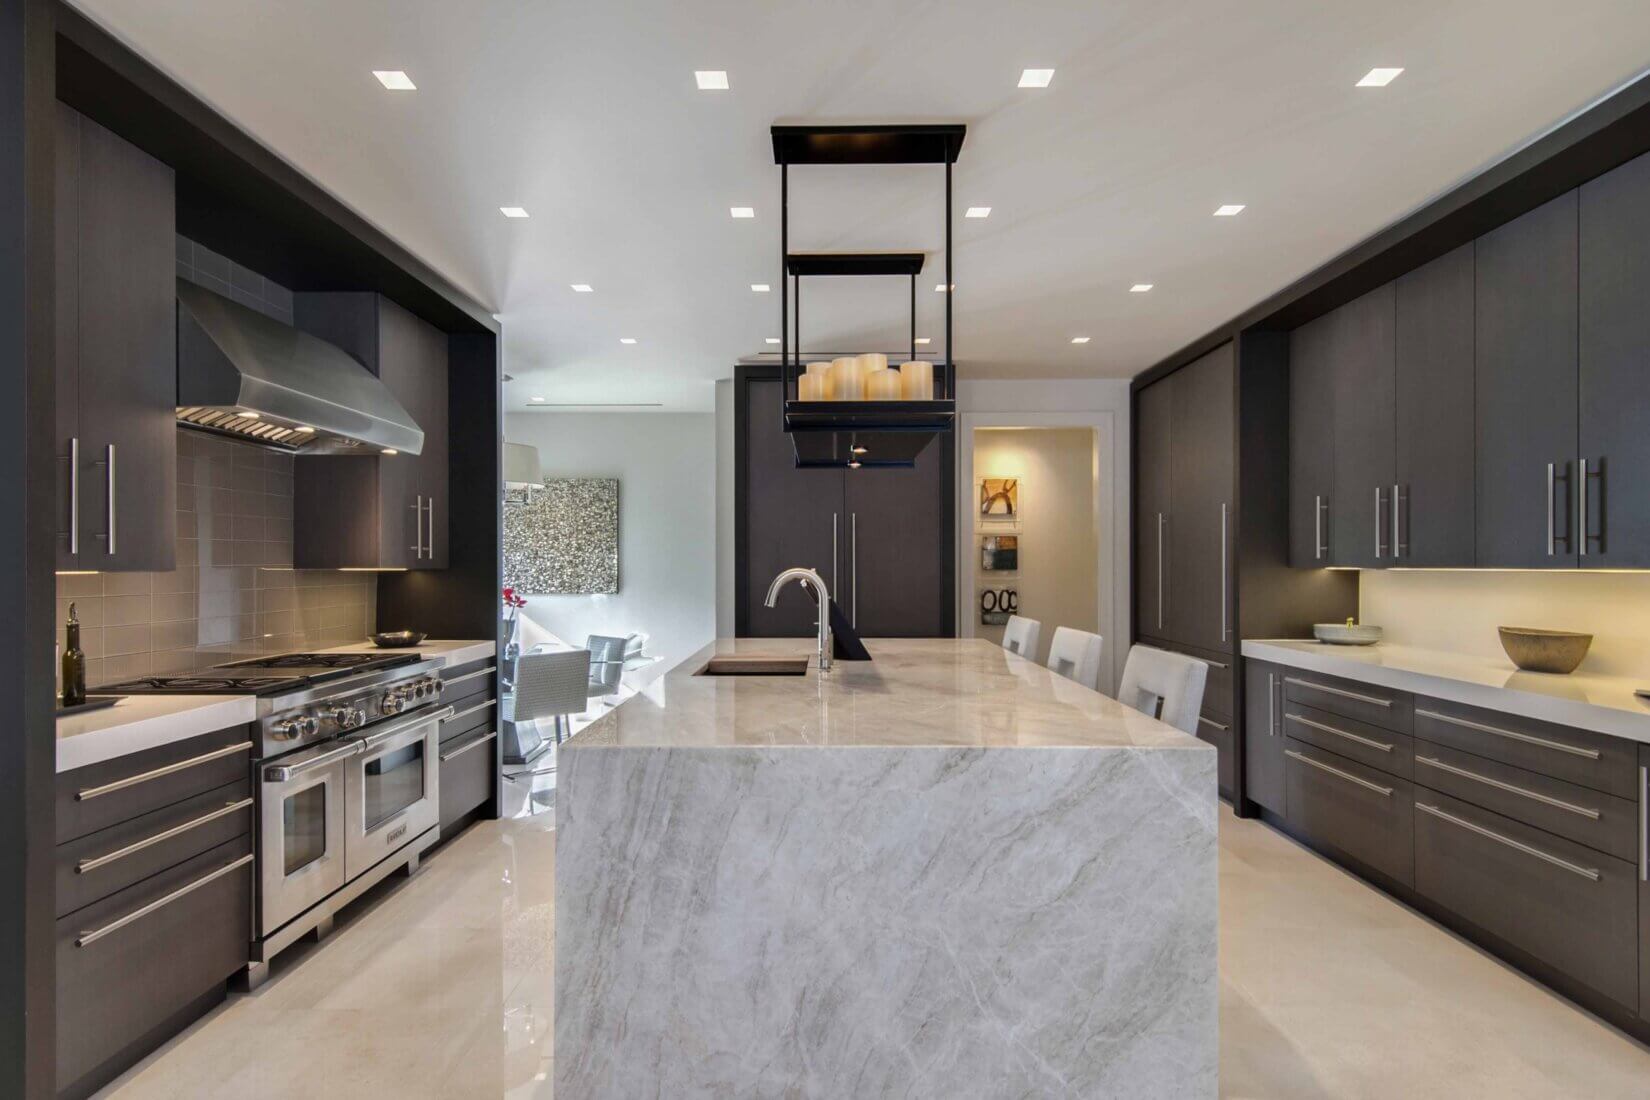 Luxury kitchen and dining area with dark-wood cabinetry